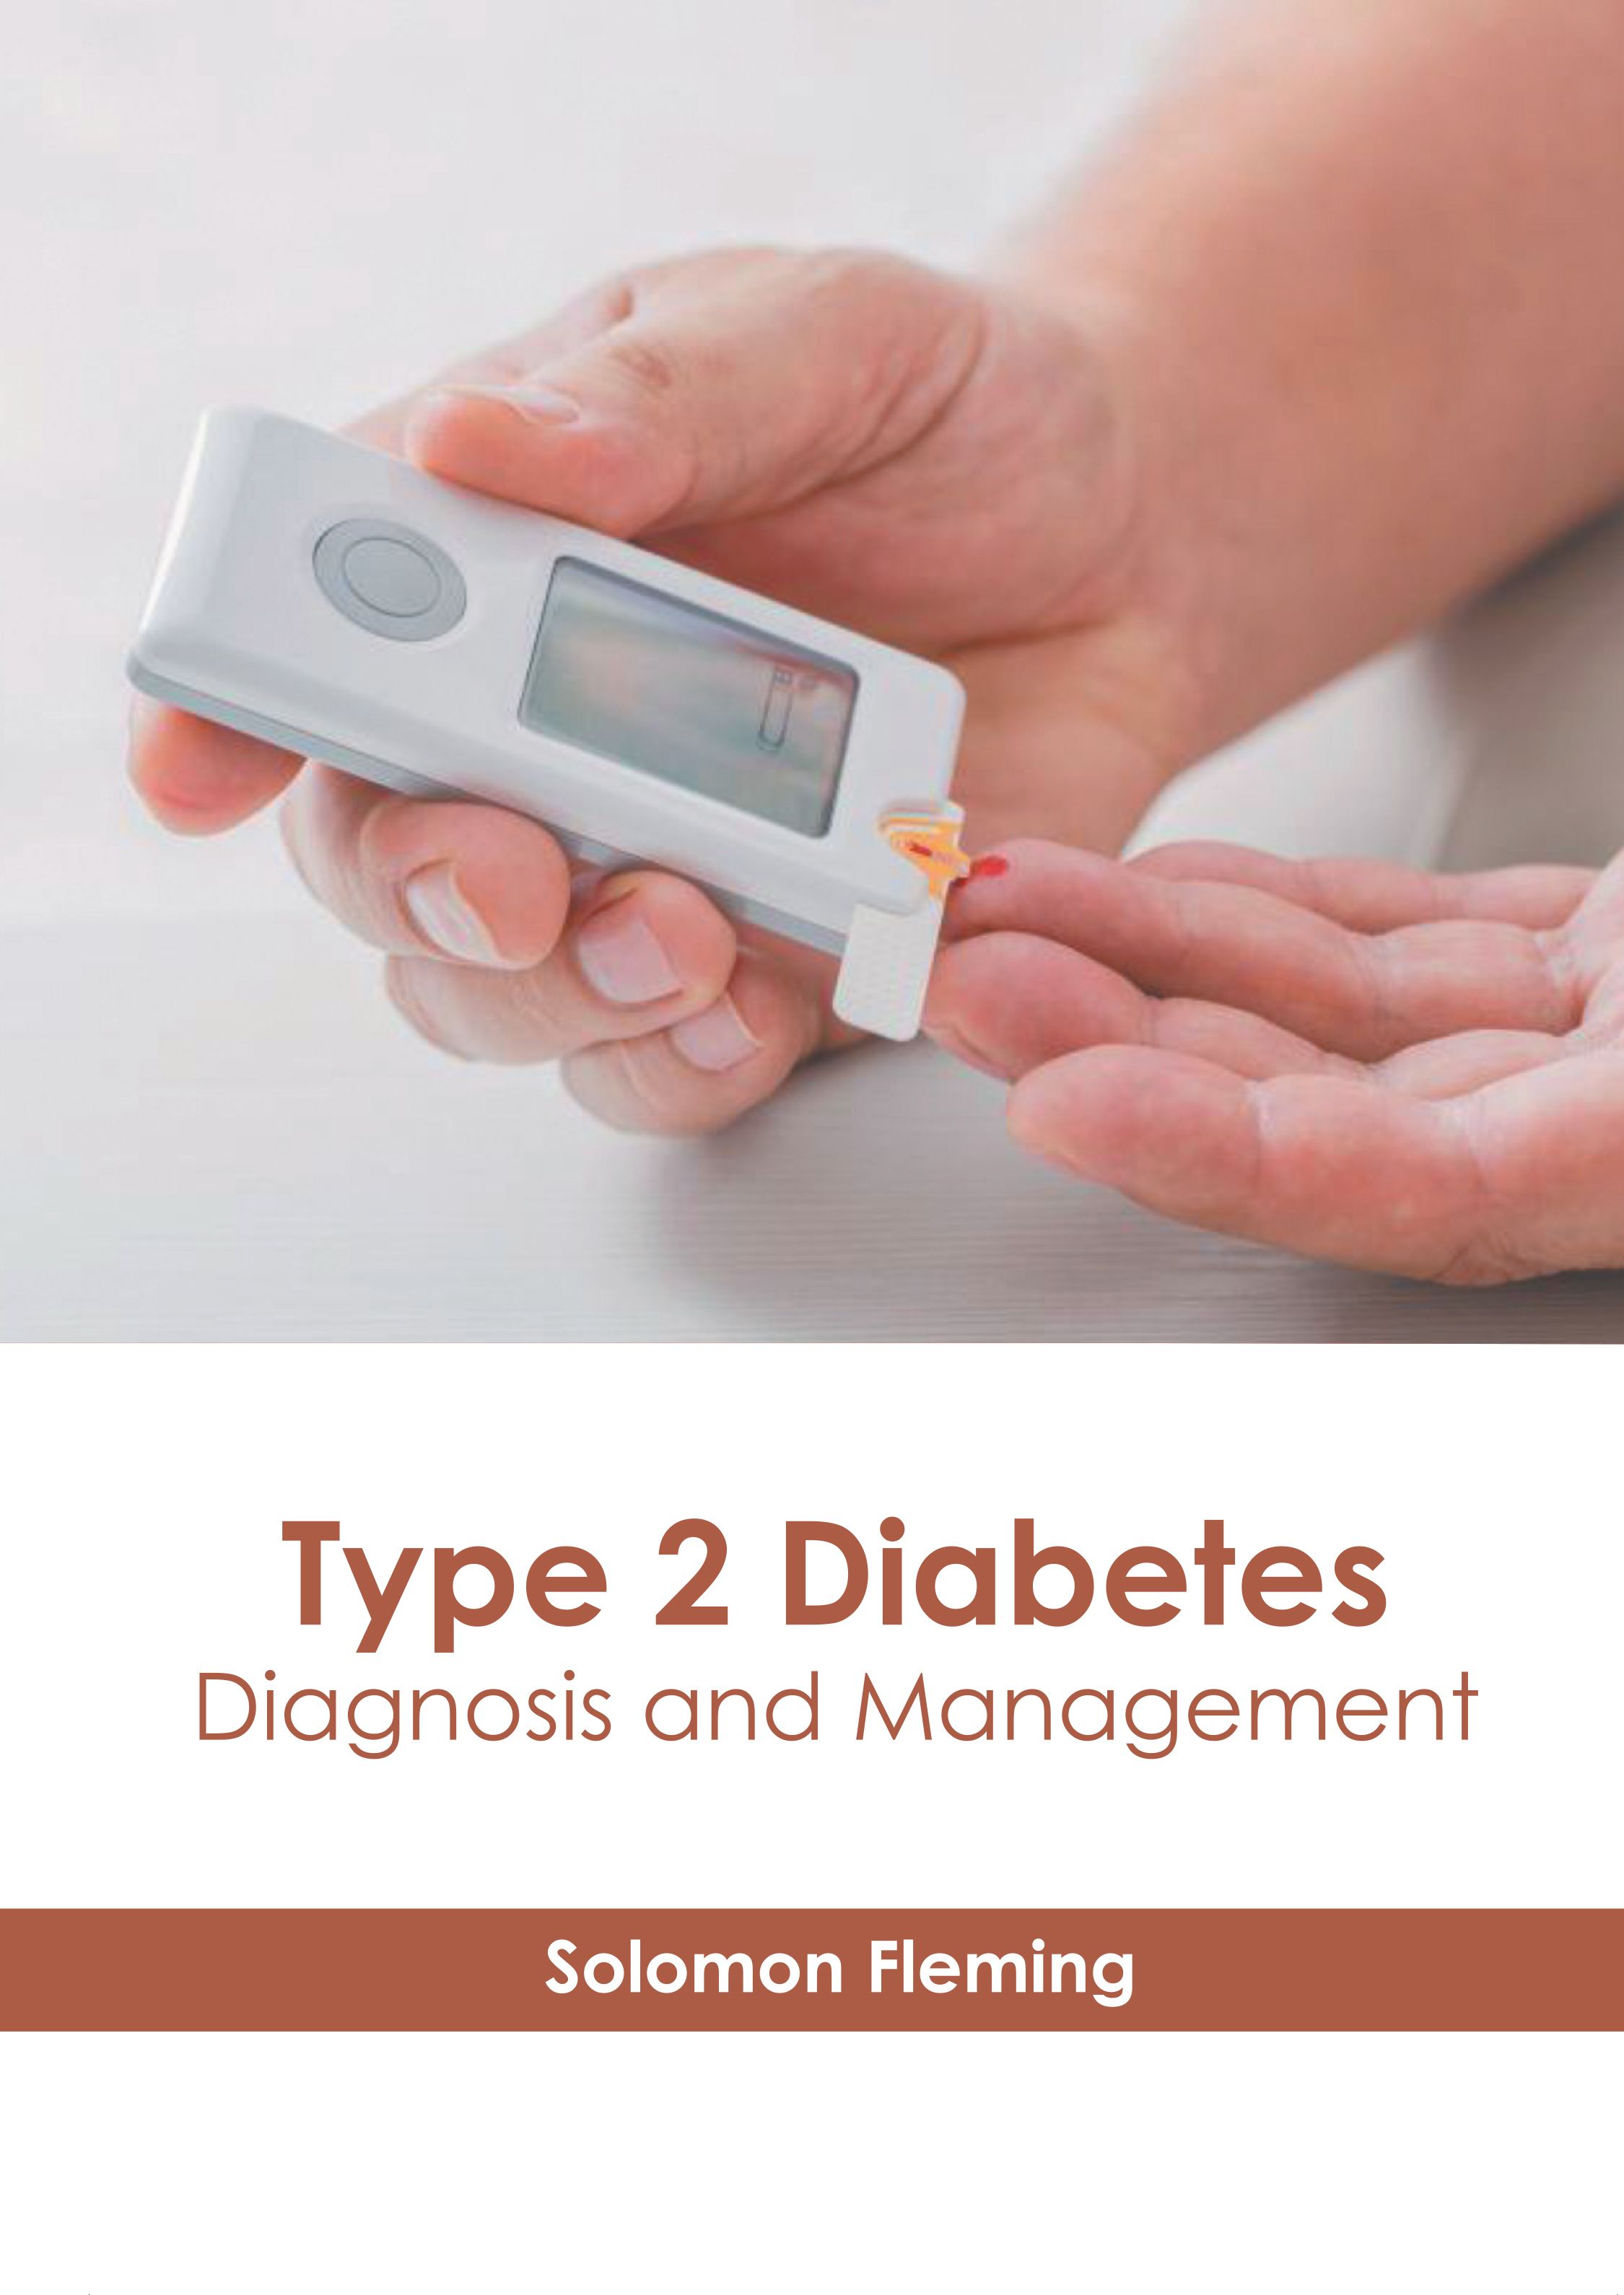 TYPE 2 DIABETES: DIAGNOSIS AND MANAGEMENT